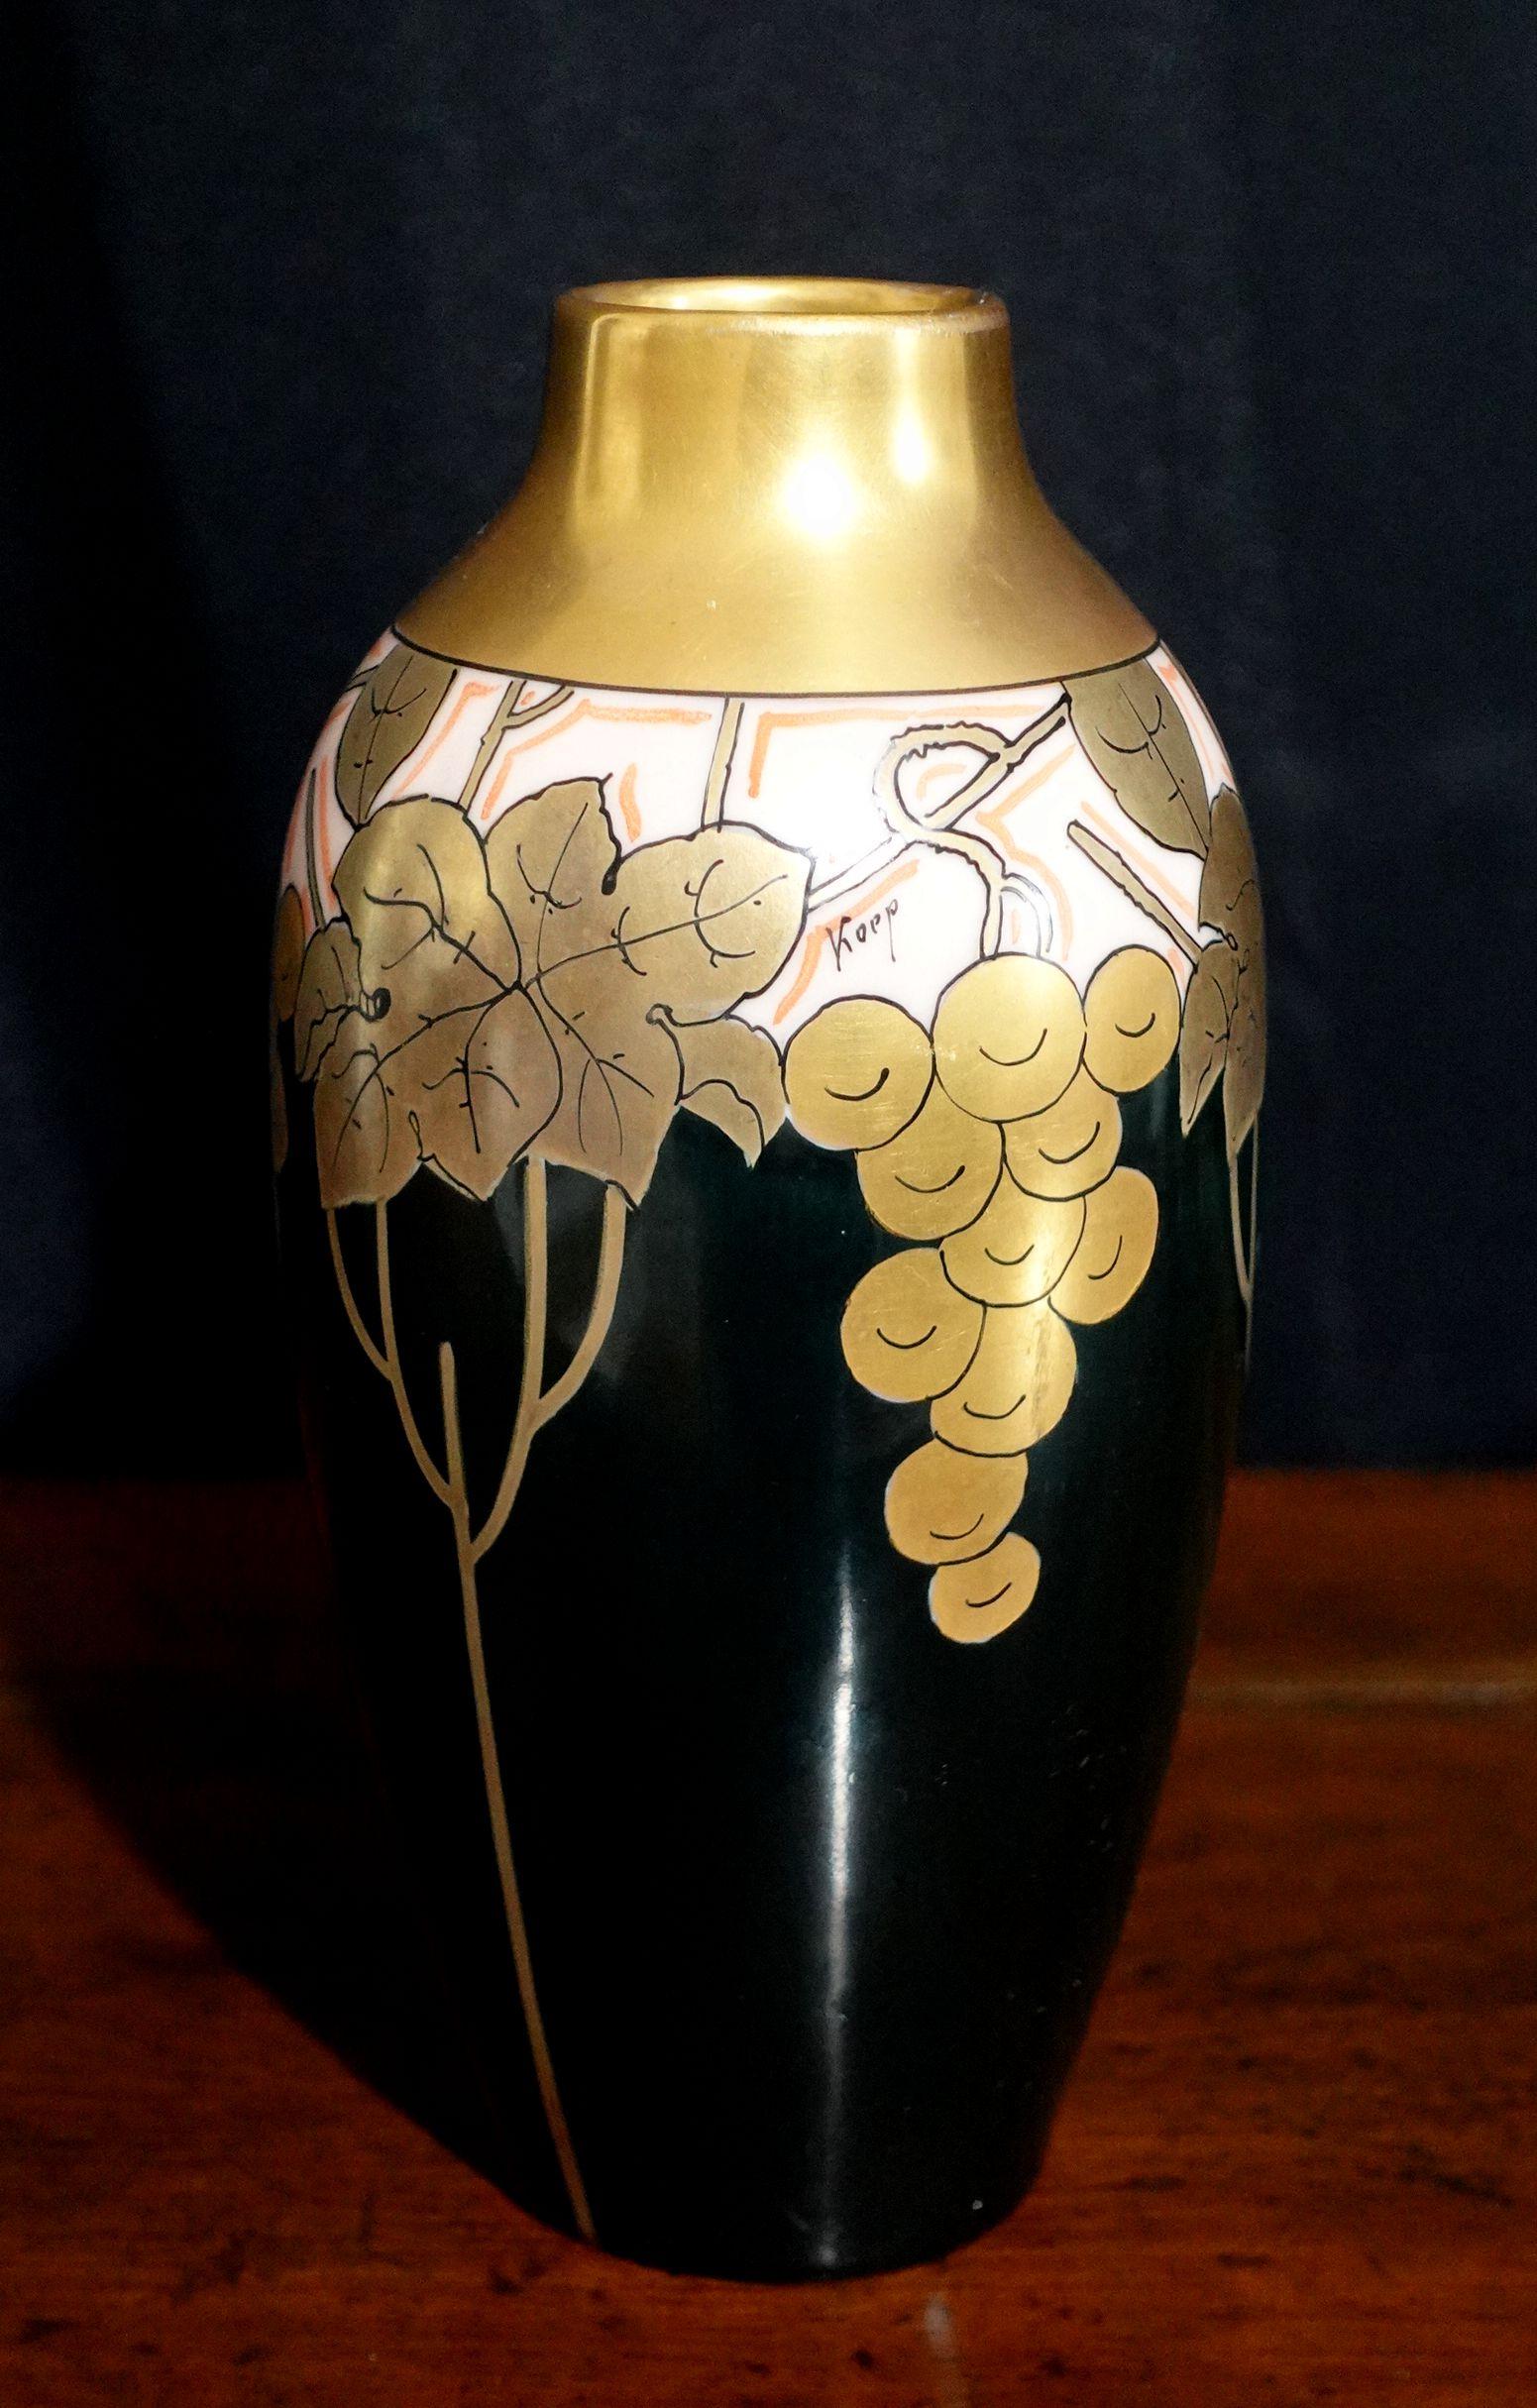 Art Nouveau Pickard hand-painted porcelain vase having a gold grape cluster and leaves design with black ground signed Koep. Stamped mark to bottom. Measures approx. 7